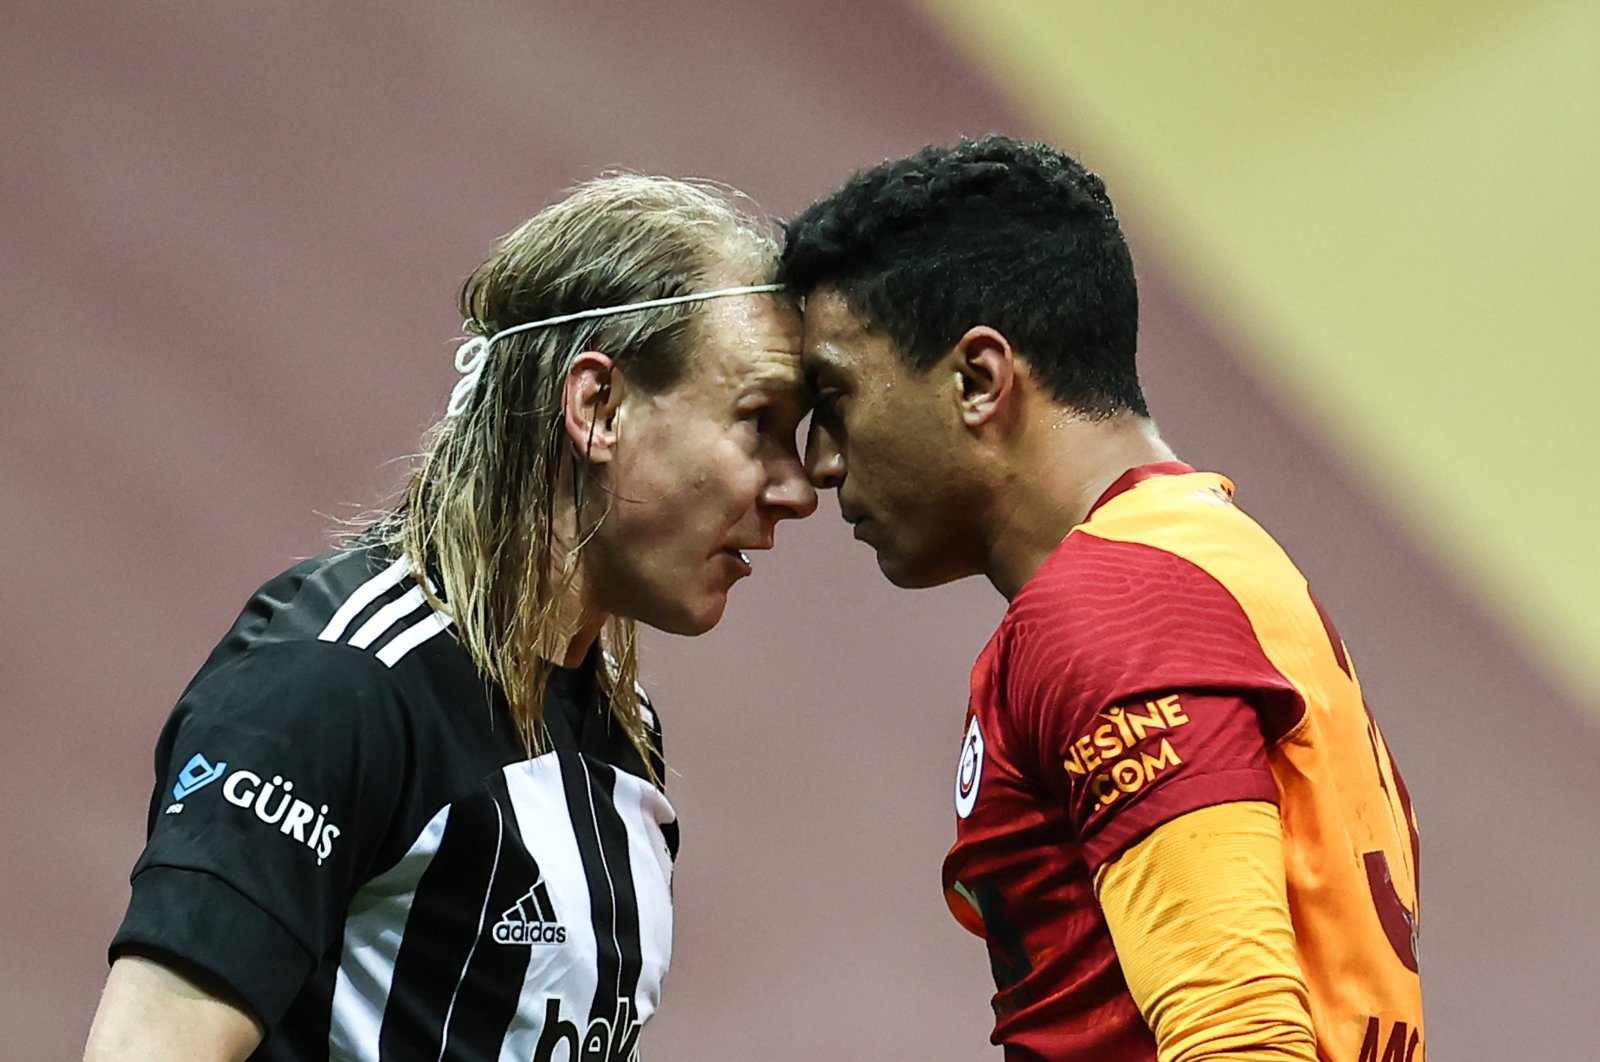 Beşiktaş's Domagoj Vida (L) and Galatasaray's Mostafa Mohamed try to stare each other down during a Süper Lig match at the Türk Telekom Arena, in Istanbul, Turkey, May 8, 2021. (AA Photo)